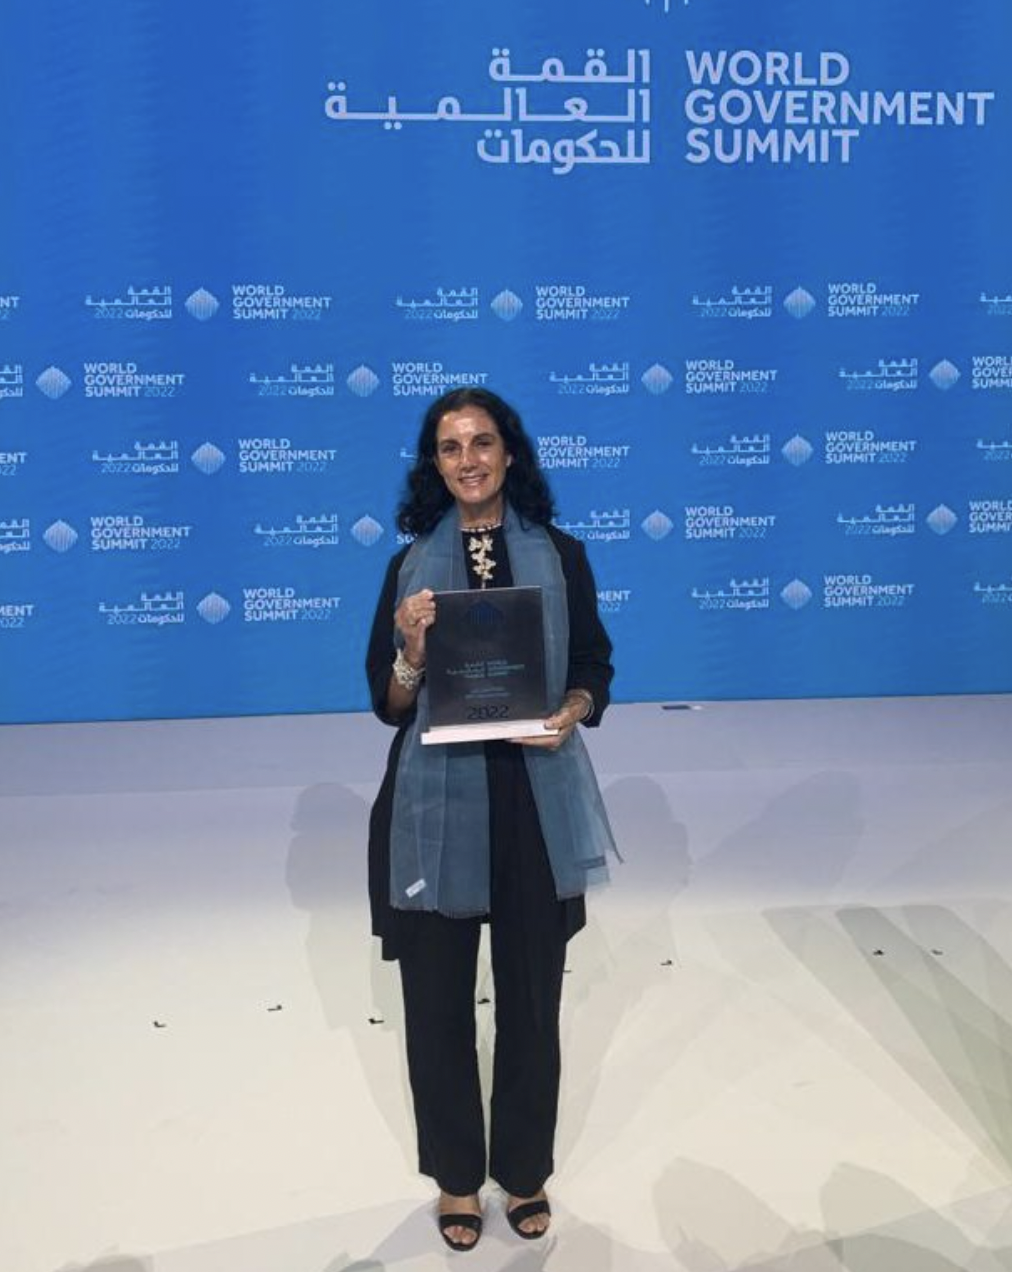 In 2019, the recognition went to the Minister of Health of Afghanistan, Fayrouz Al-Din Fayrouz